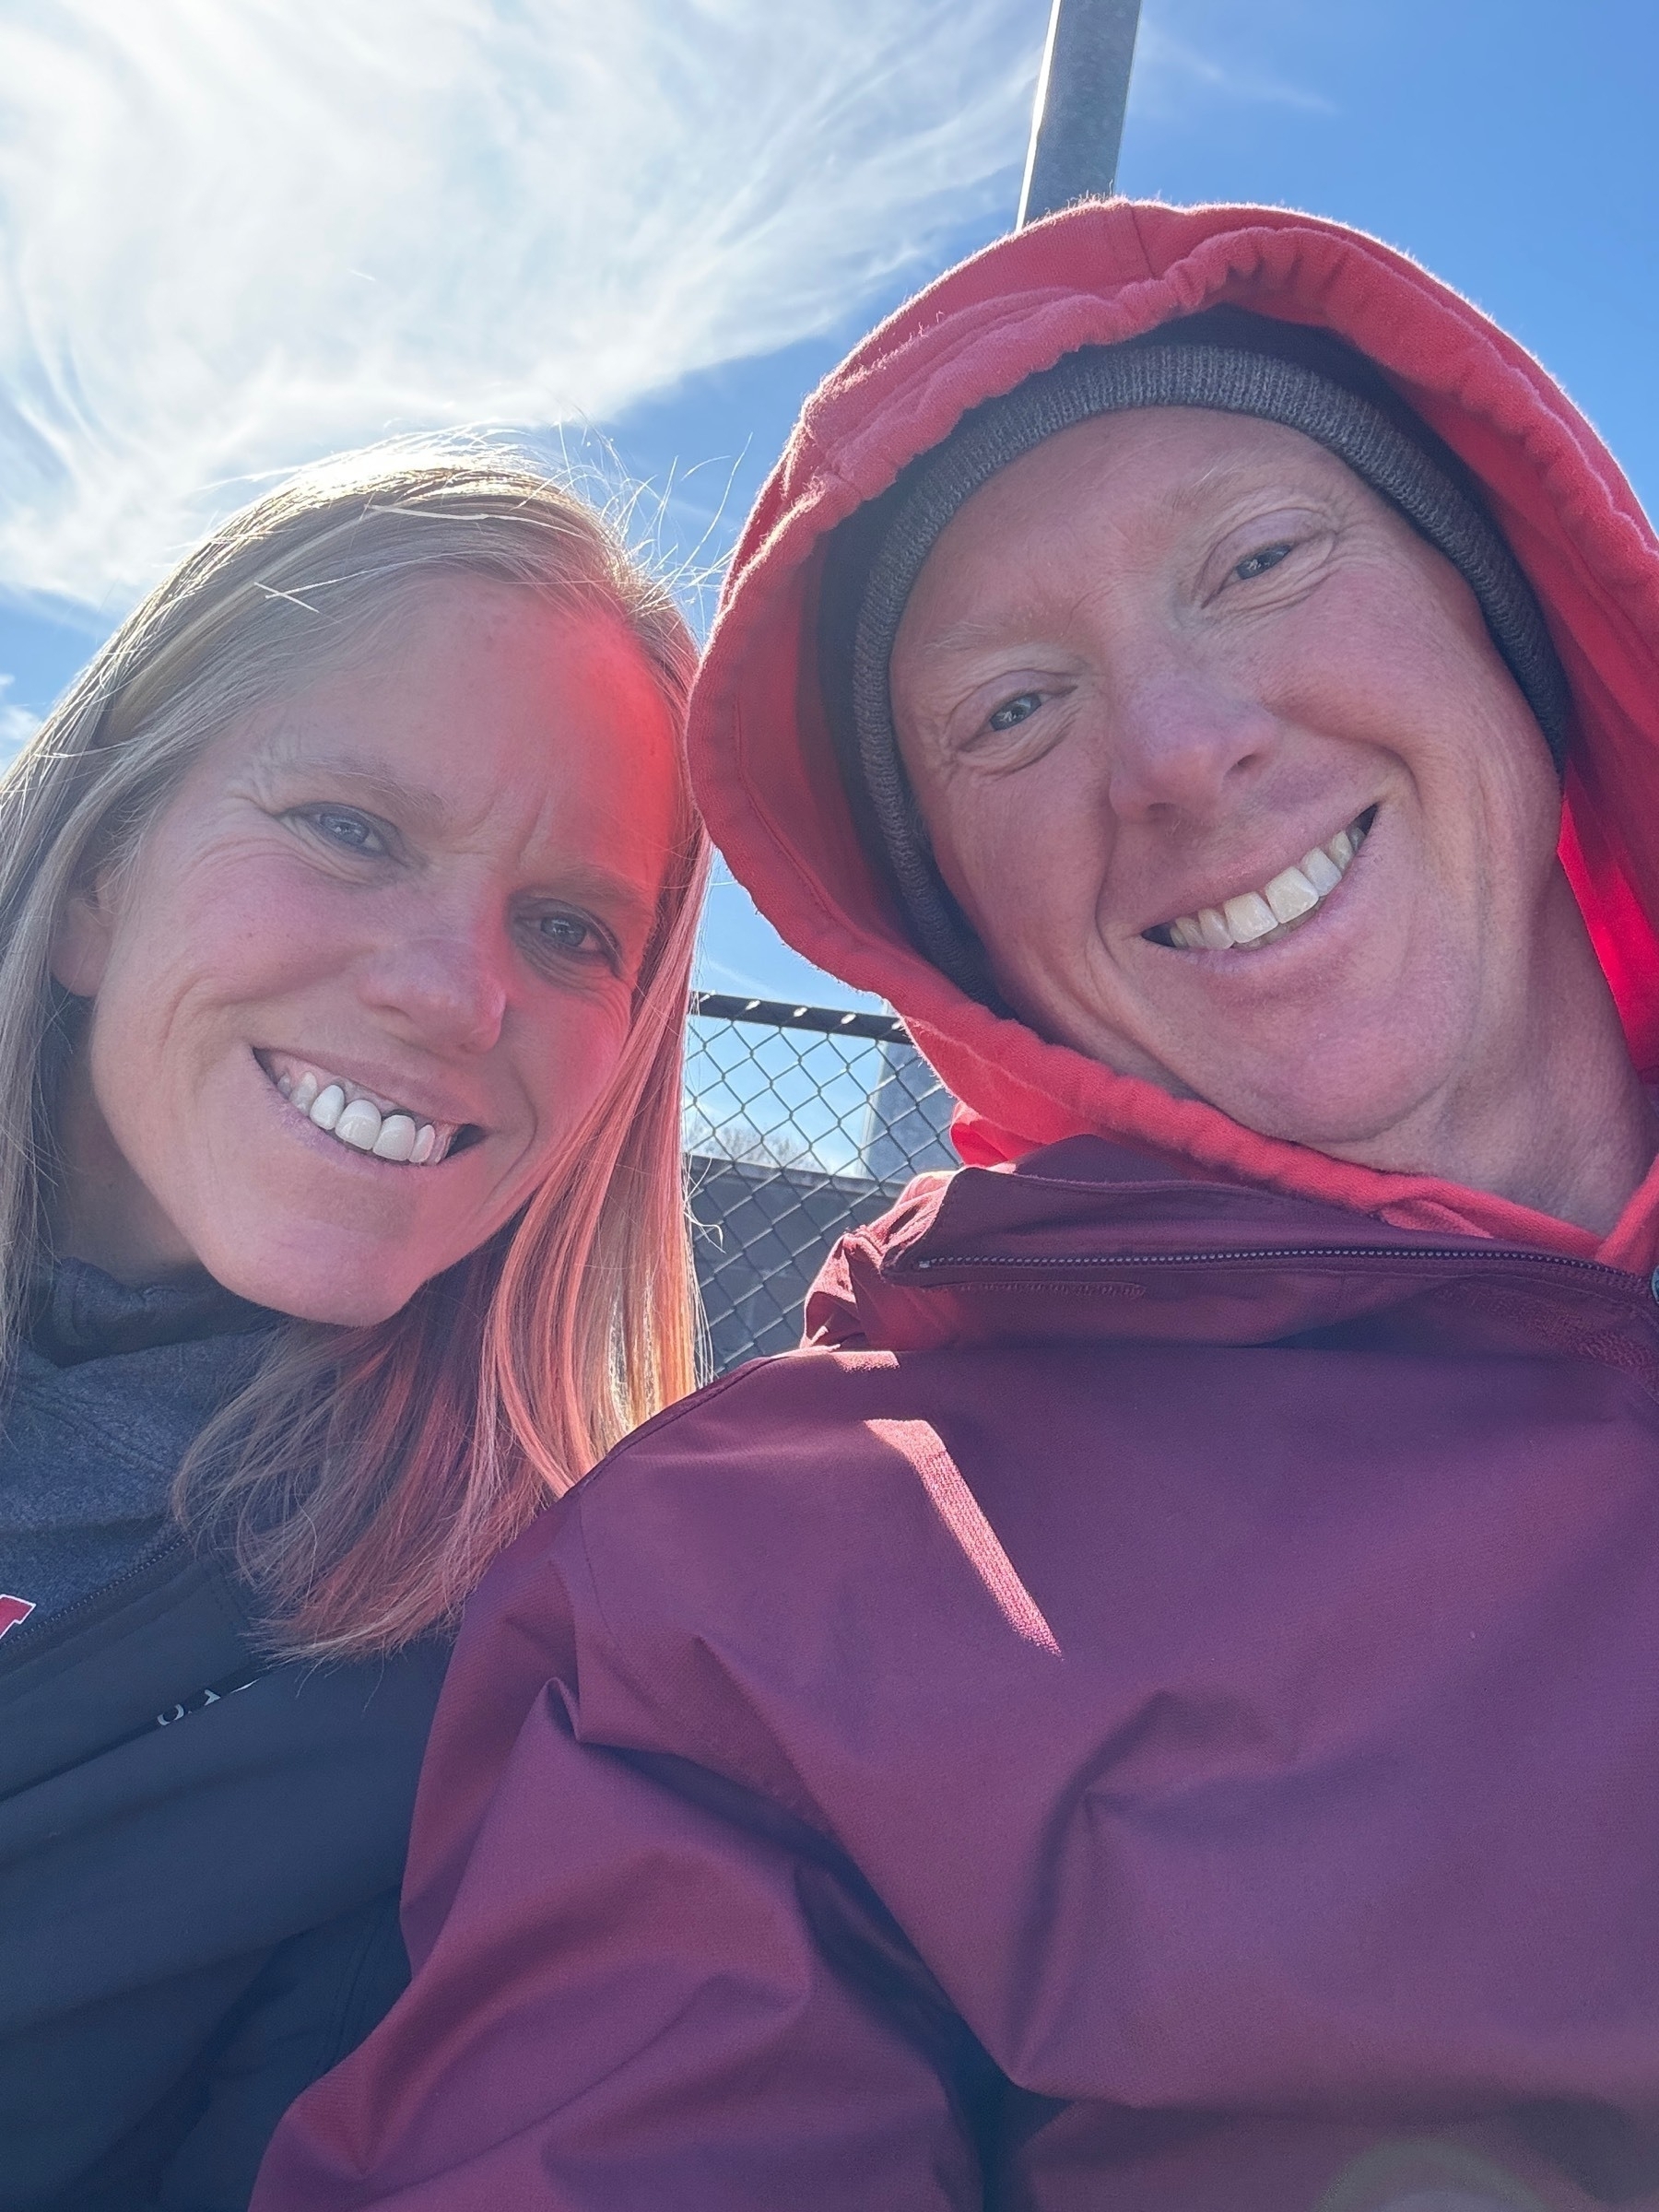 My wife and I freezing at a baseball game on a windy spring afternoon. 